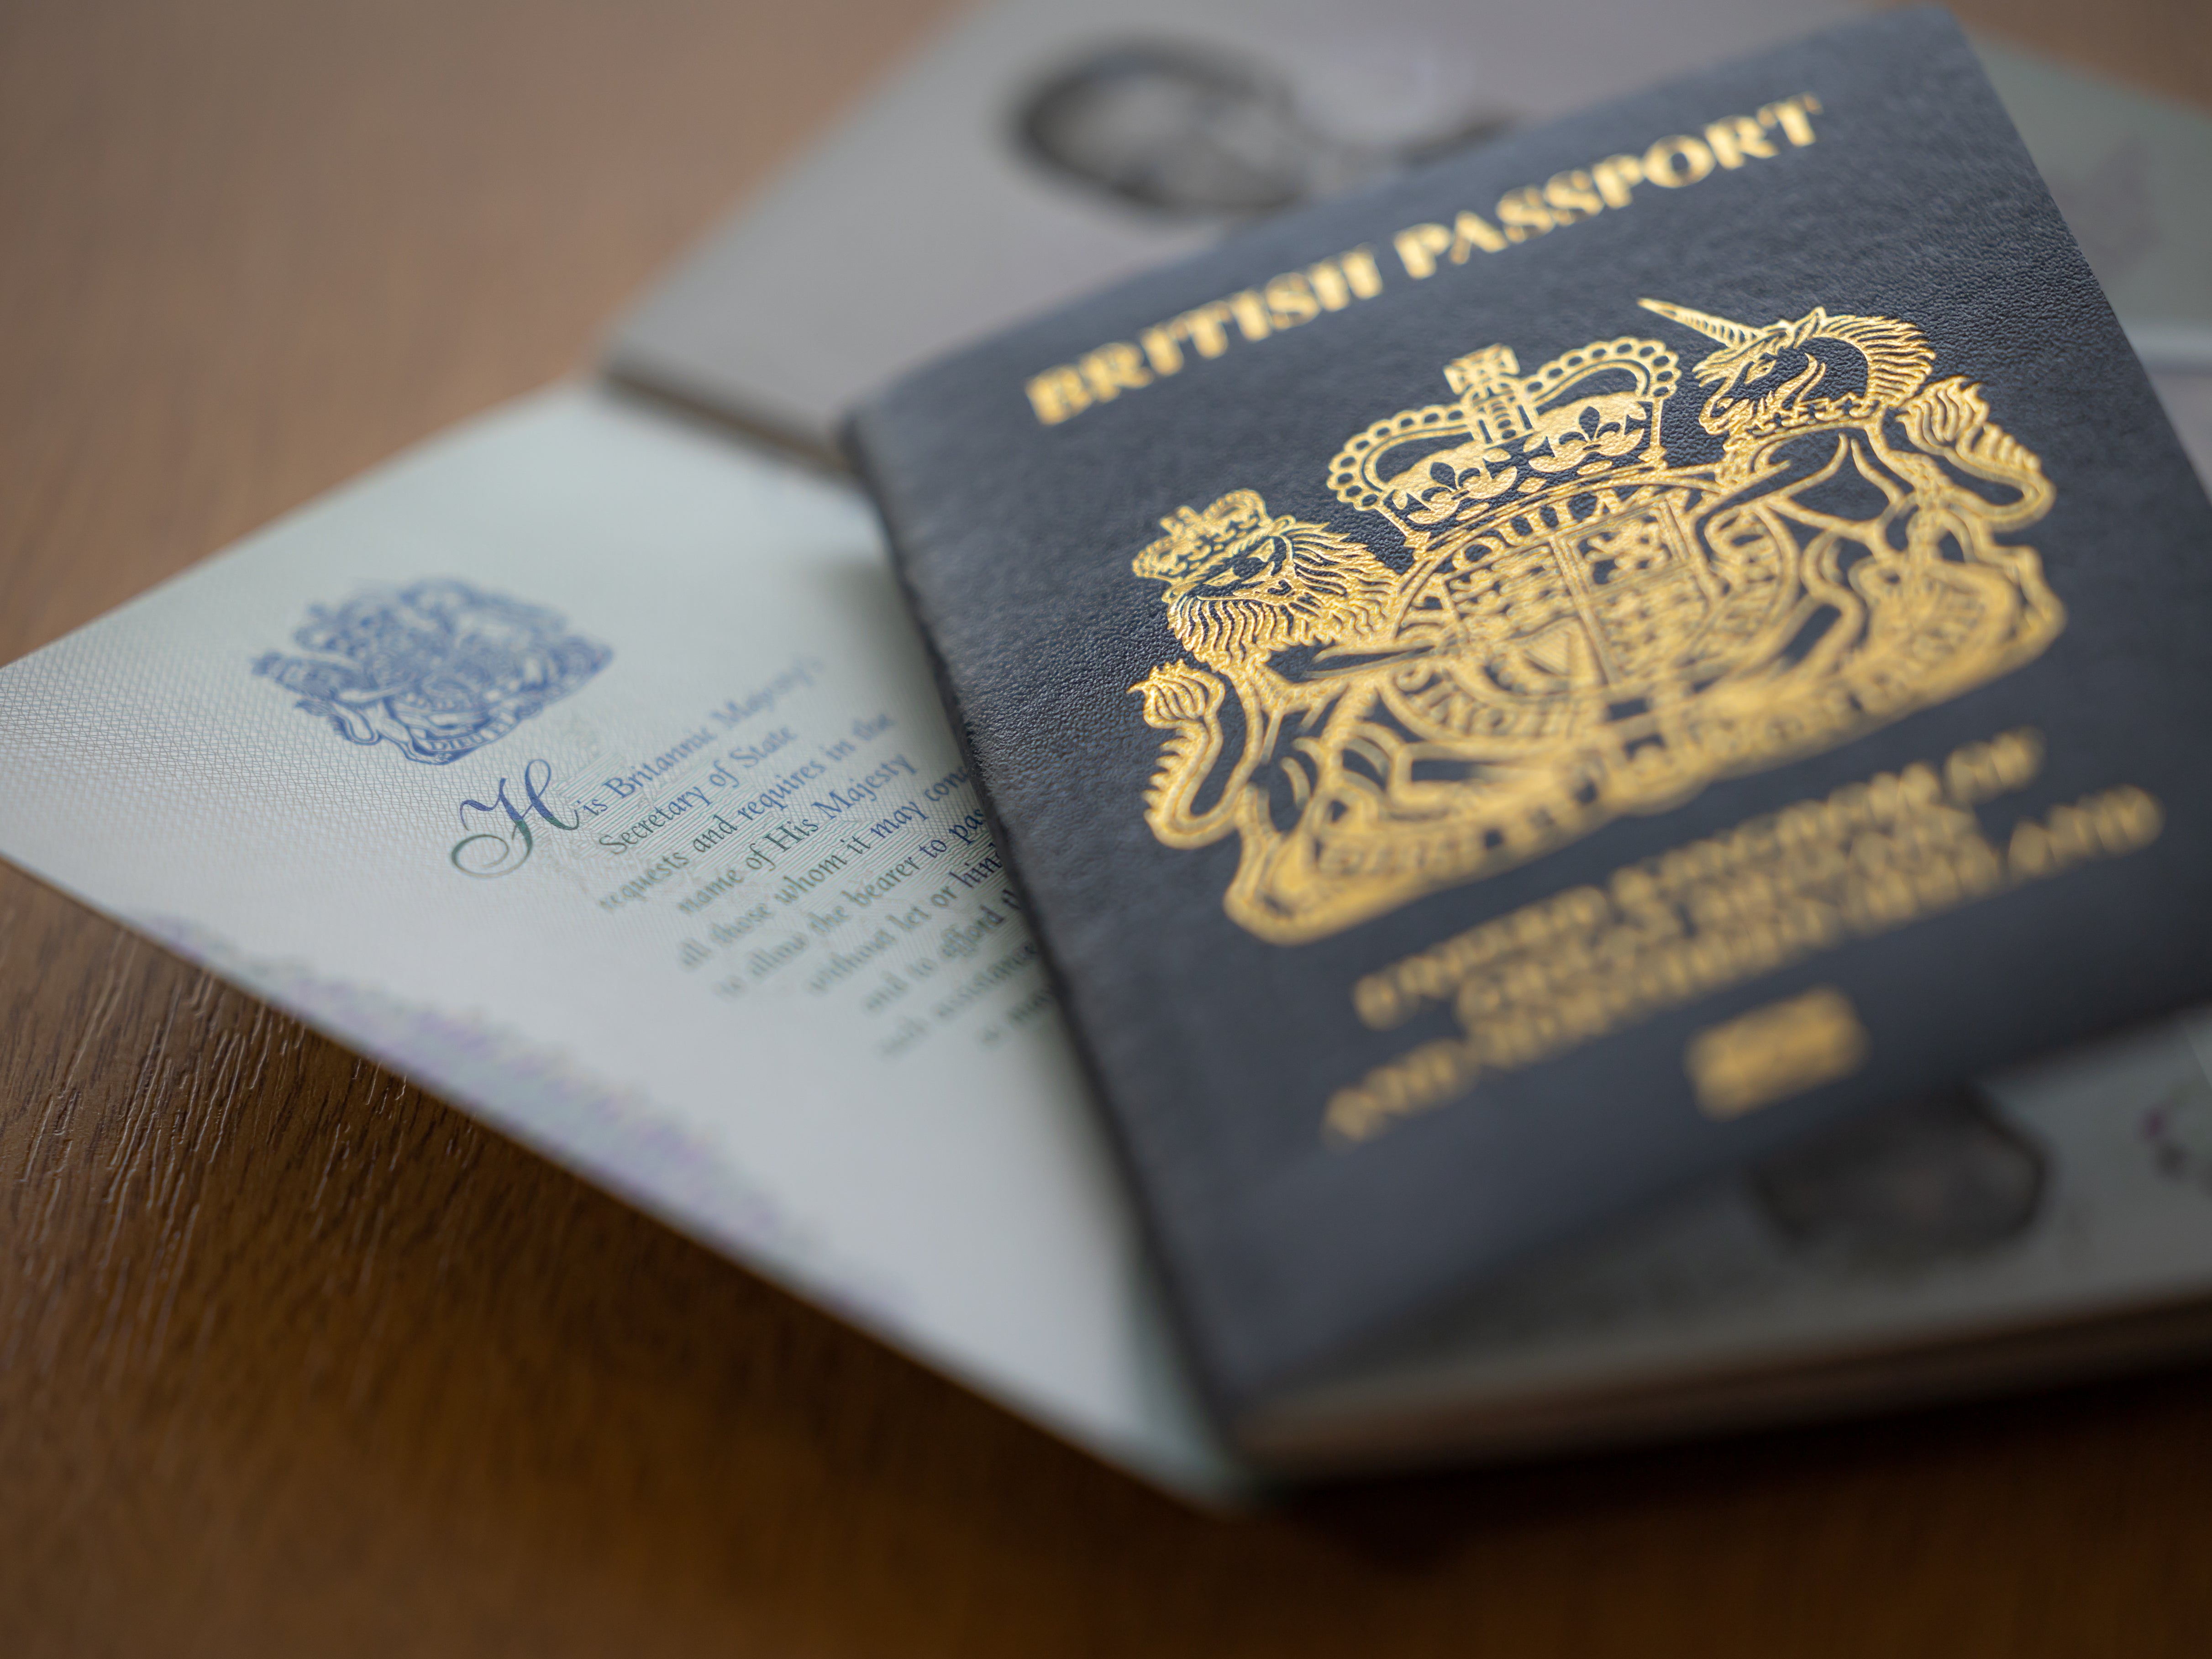 British passports to change specific part of wording for first time